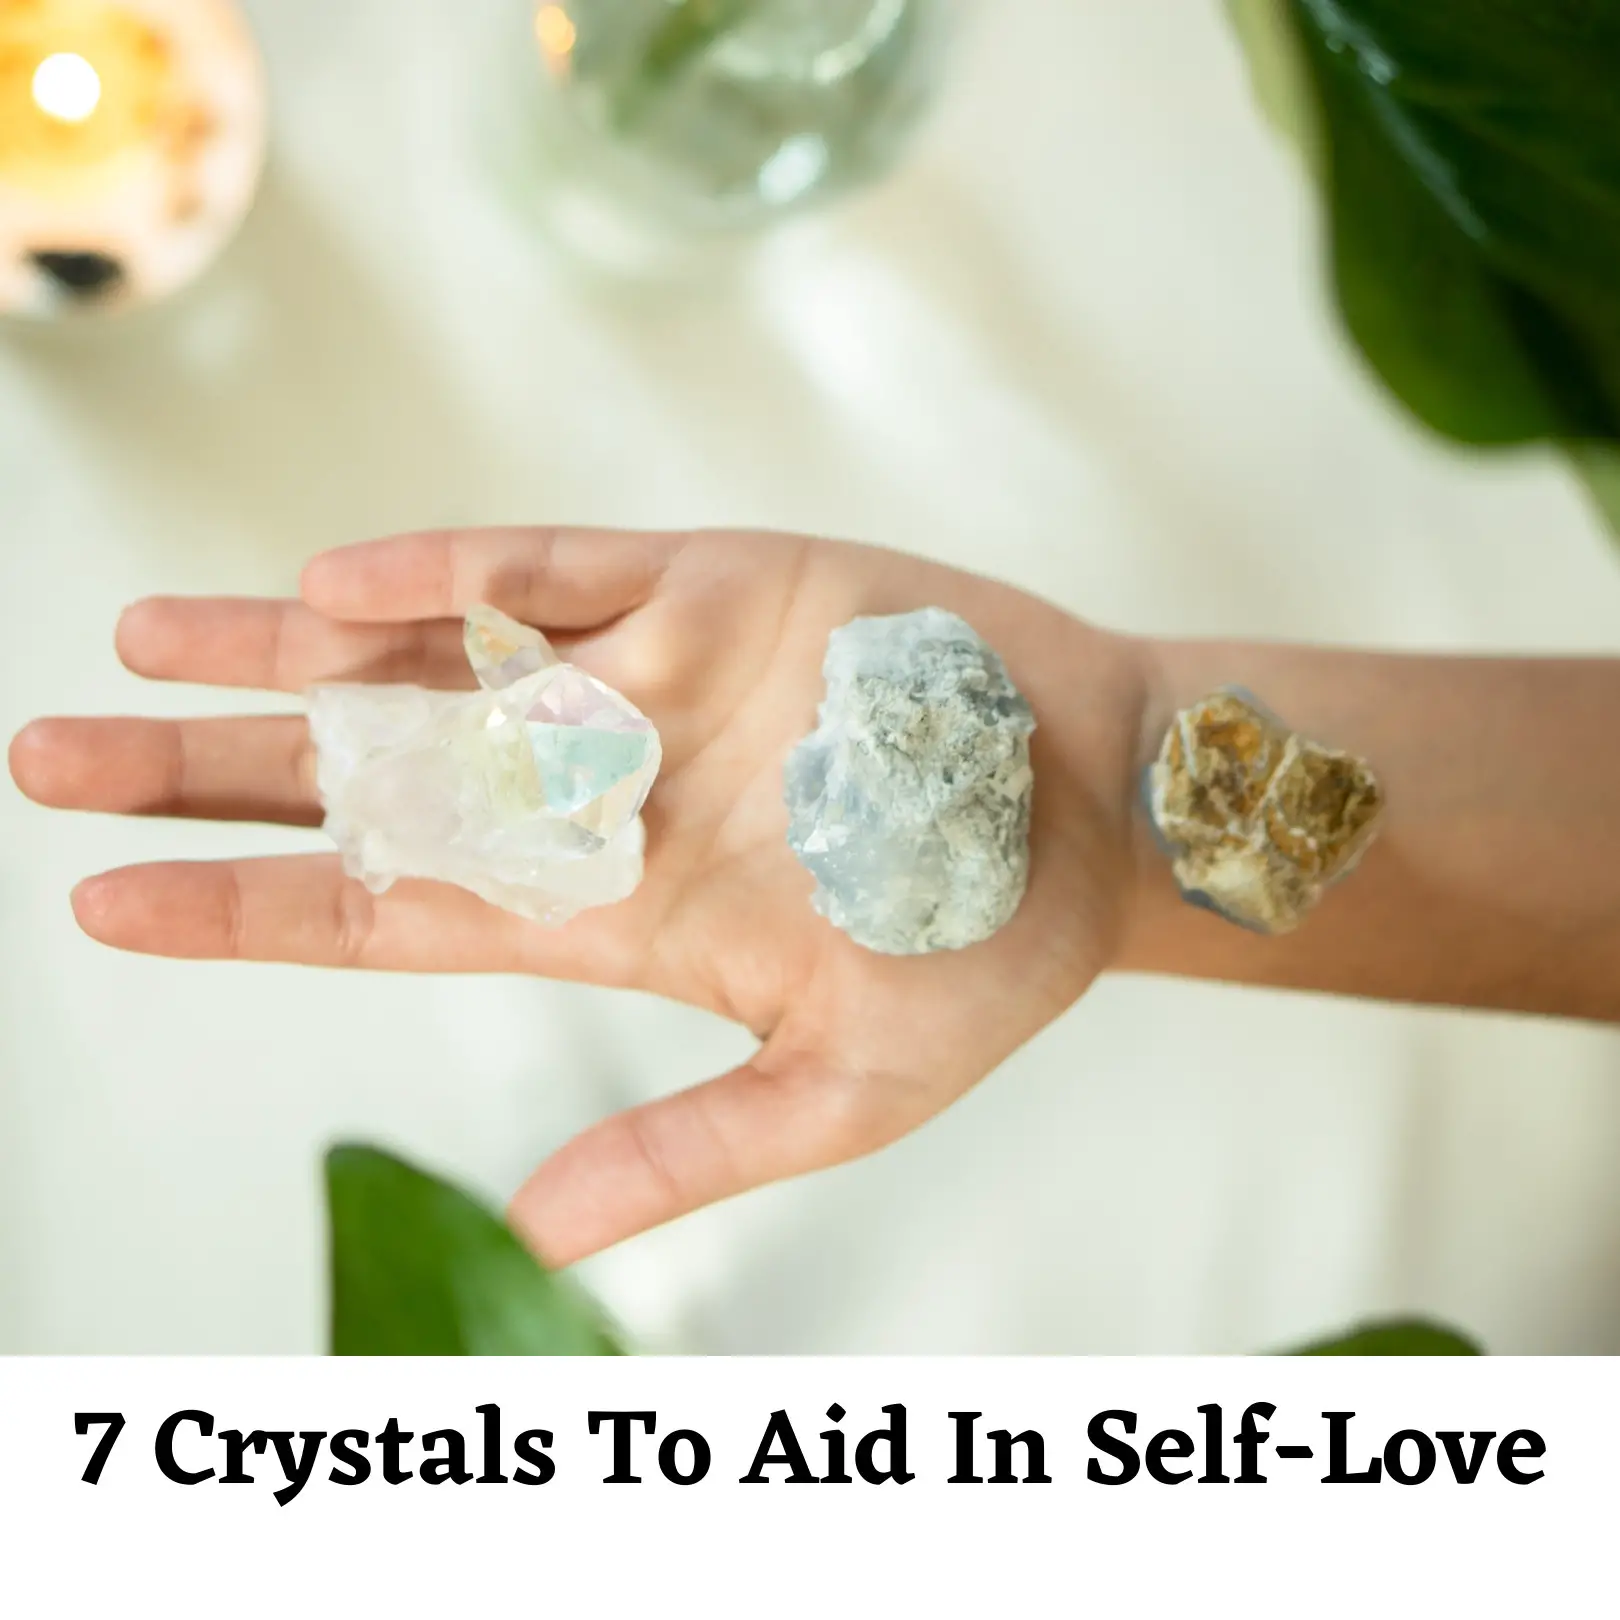 Crystals For Self-Love